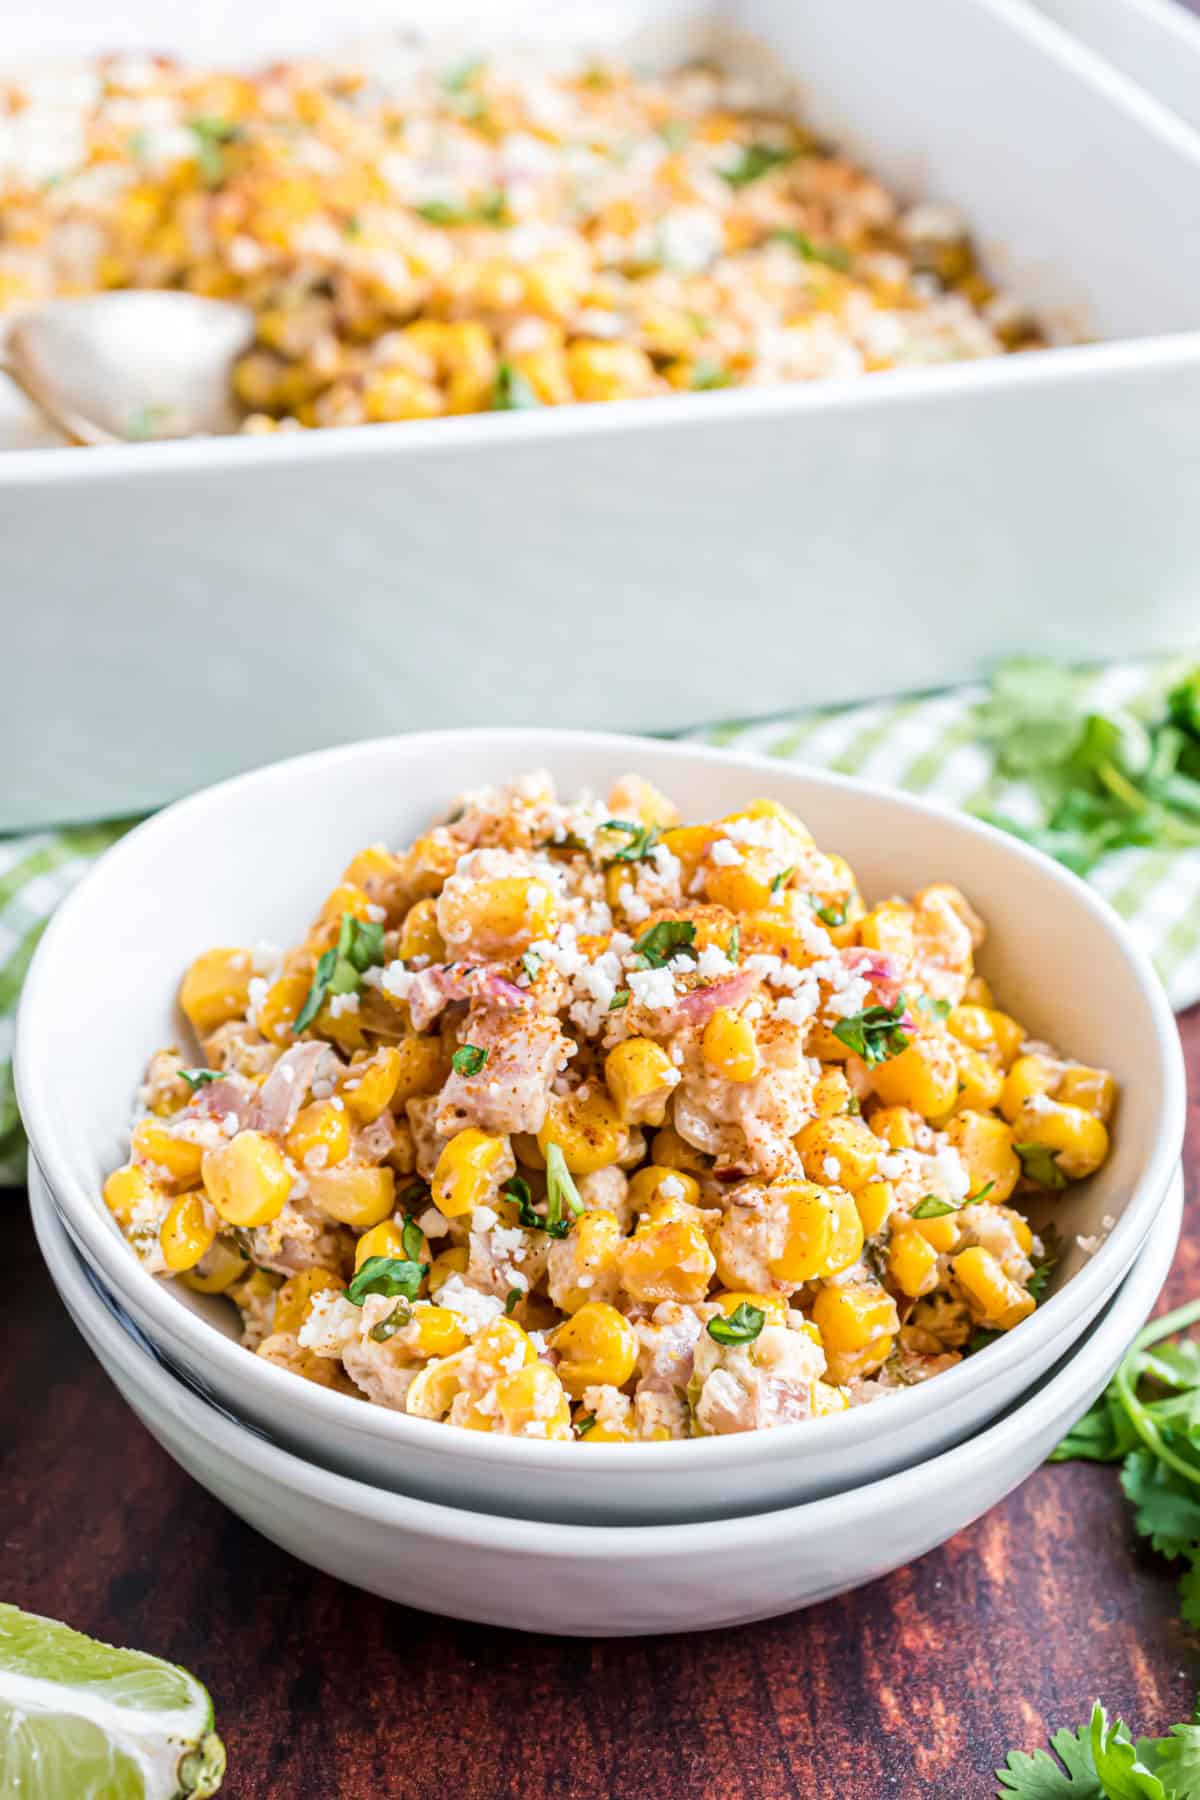 Mexican street corn salad served in a white bowl.